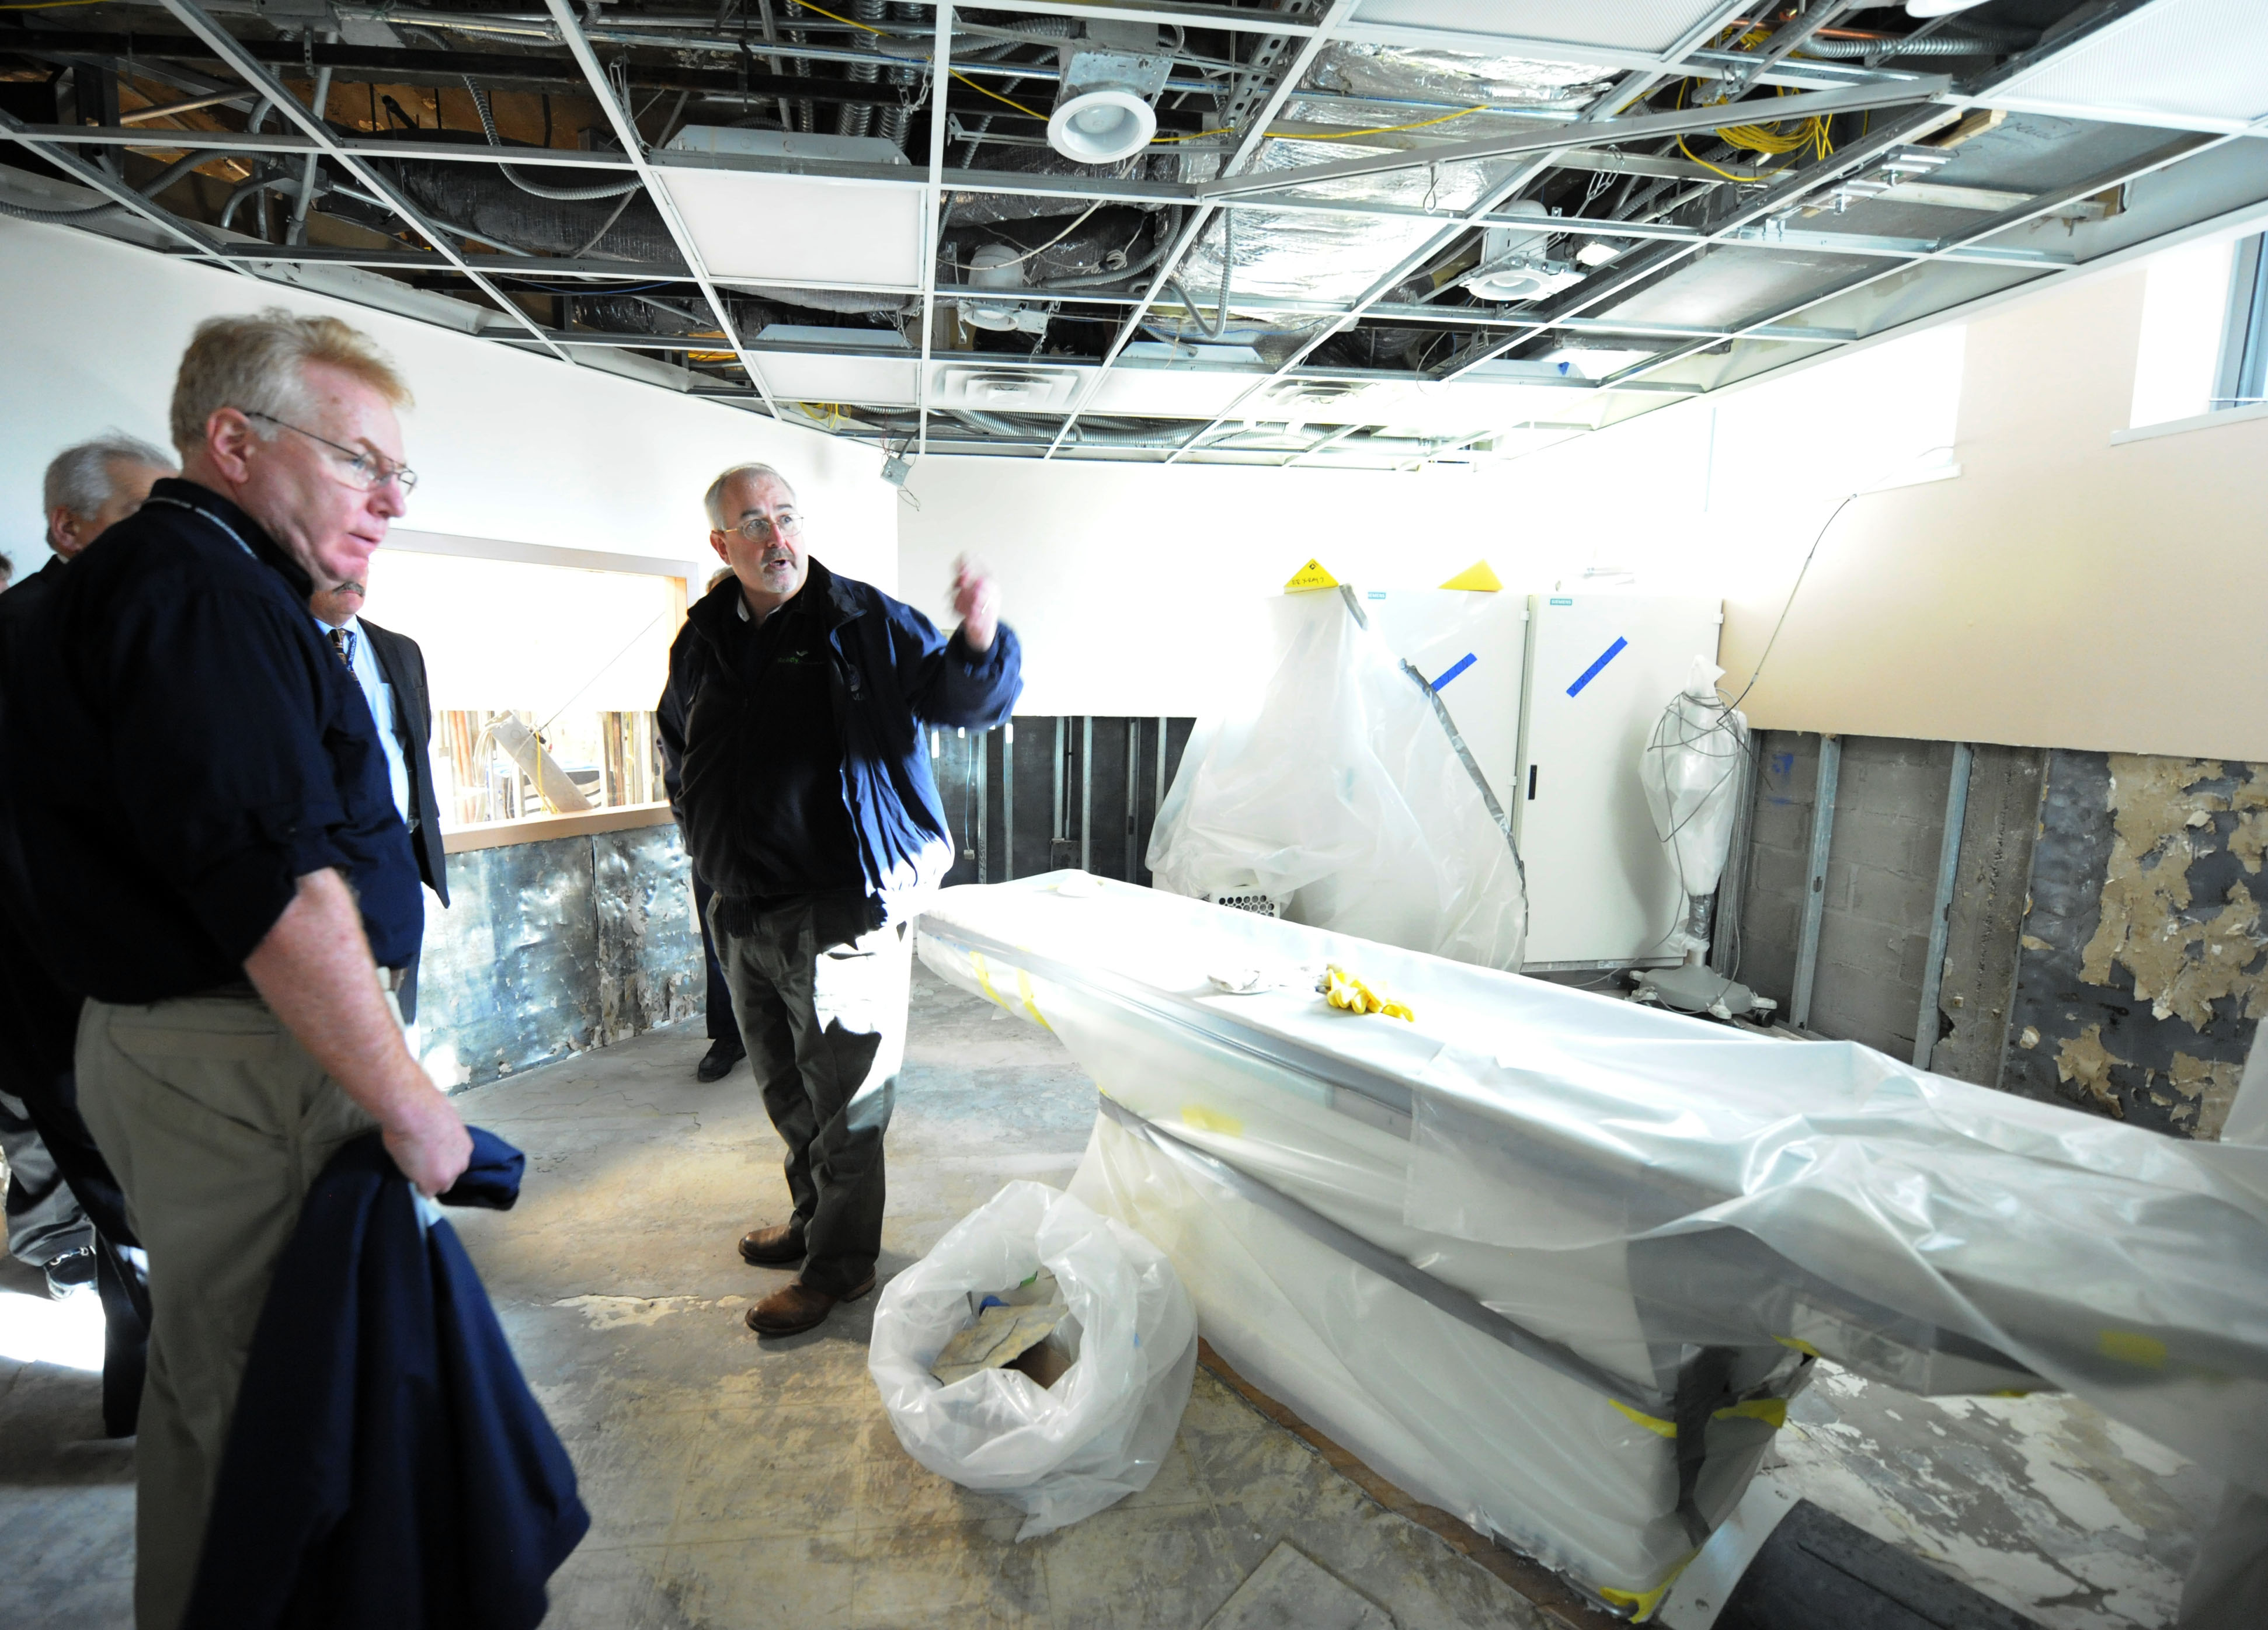 At Coney Island Hospital in mid-December, imaging equipment damaged by the storm surge. Photo: Jocelyn Augustino, FEMA 